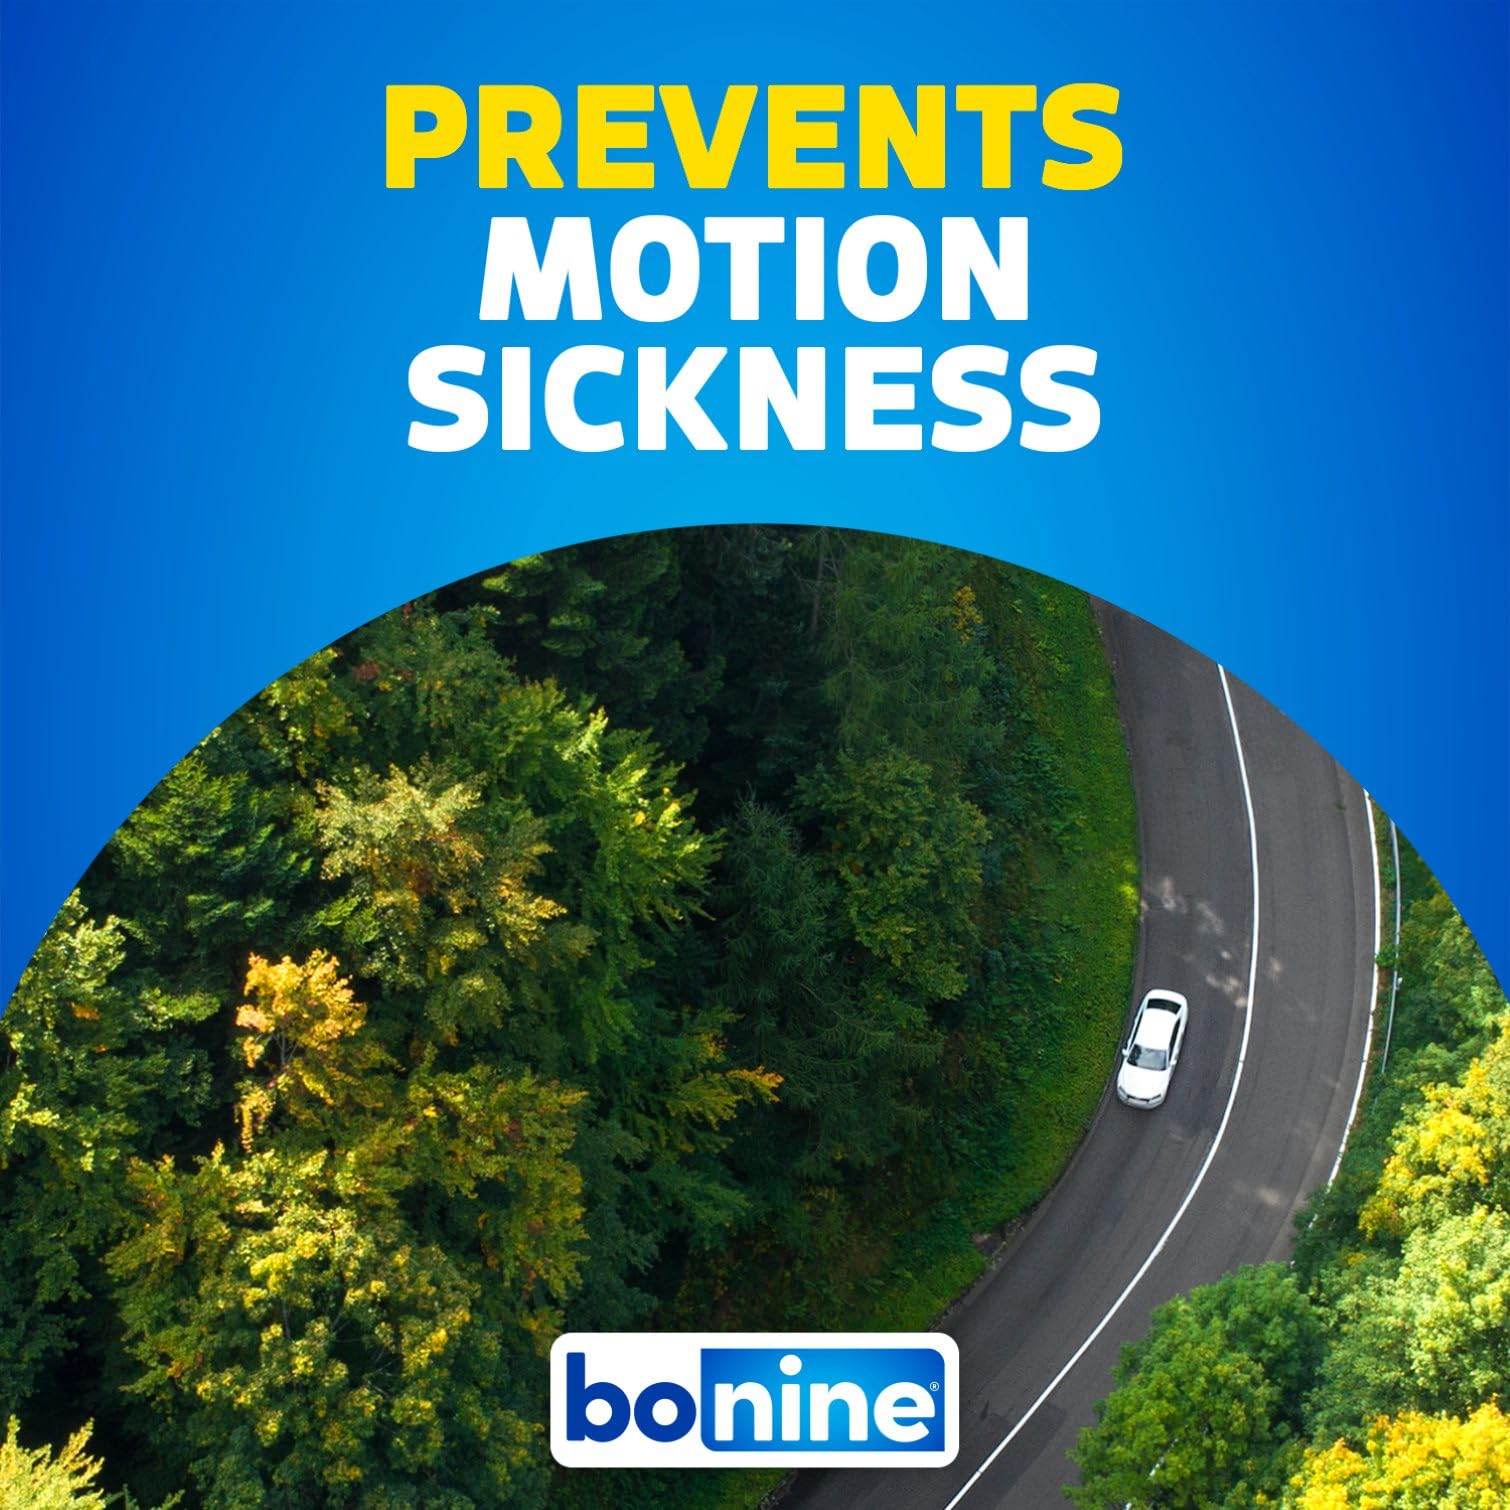 Bonine Non-Drowsy Motion Sickness Relief - Chewable Tablets with Meclizine HCL 25mg - Non Drowsy Medicine for Nausea or Motion Sickness - Cruise Essentials - Raspberry Flavor, 16 Chewable Tablets